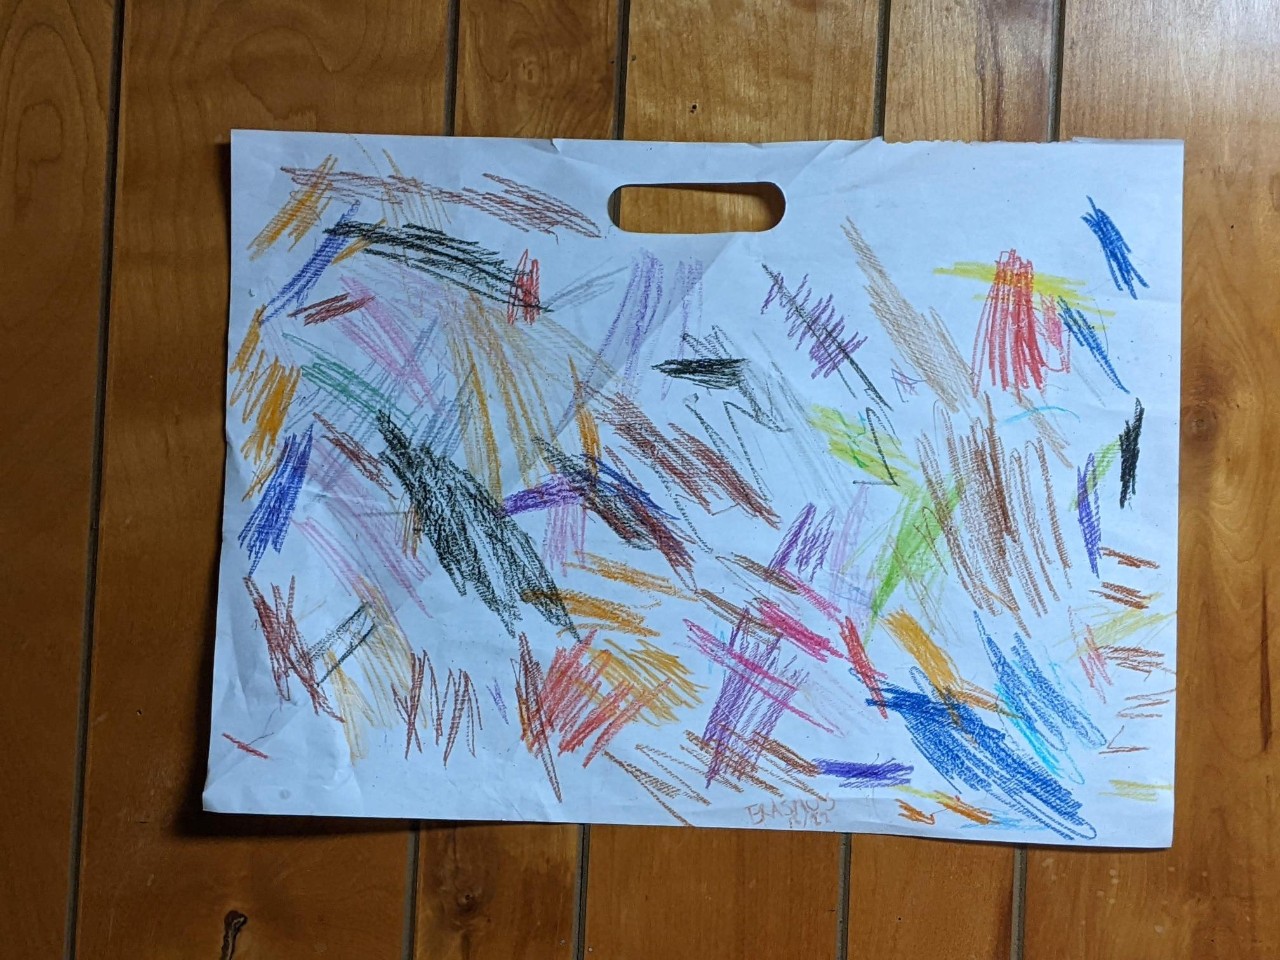 the actual artwork the toddler created, streaks of varying colors across the white paper